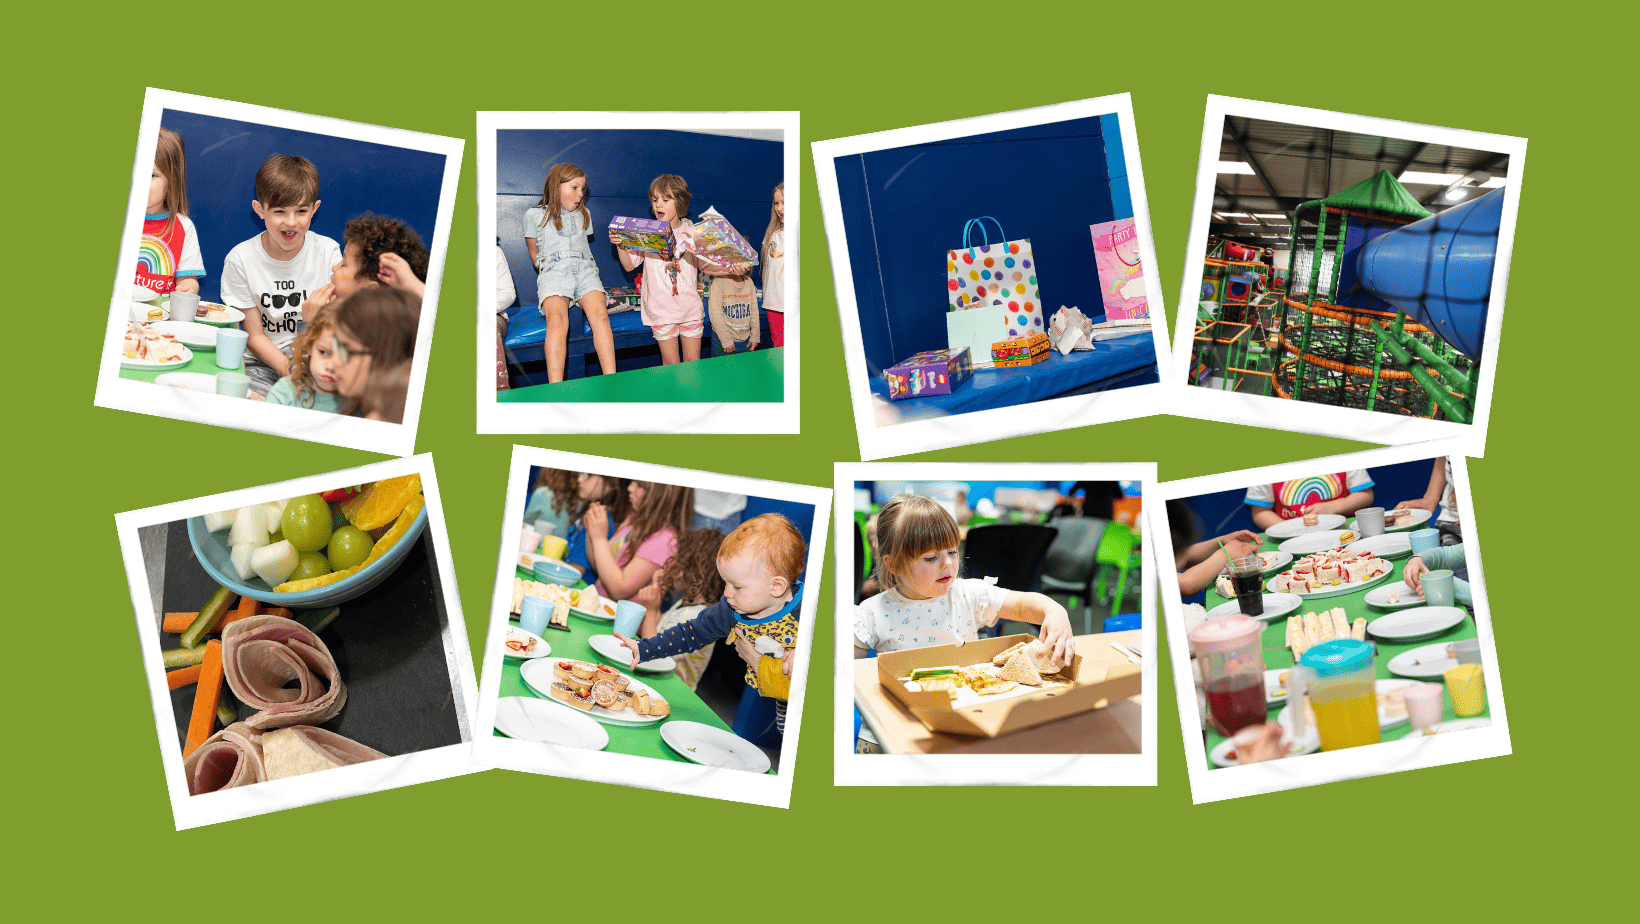 Kids parties at Kidzplay and Little Bees Soft Play centres in Yorkshire